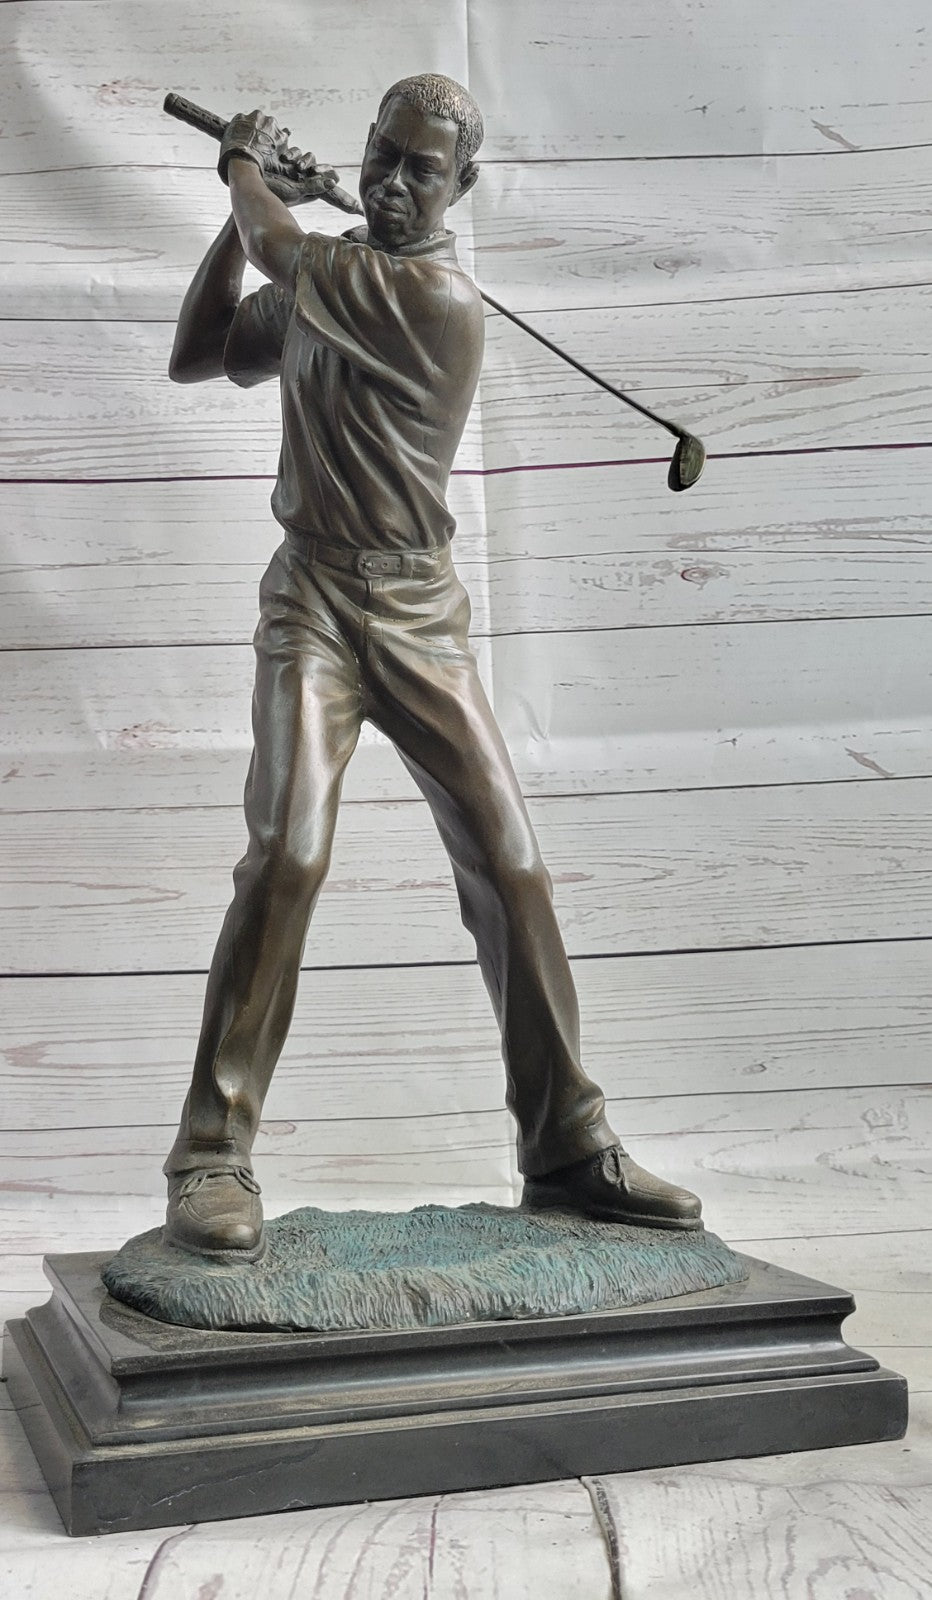 Collectible Milo Sculpture: Handcrafted Solid Bronze Male Golfer Figurine